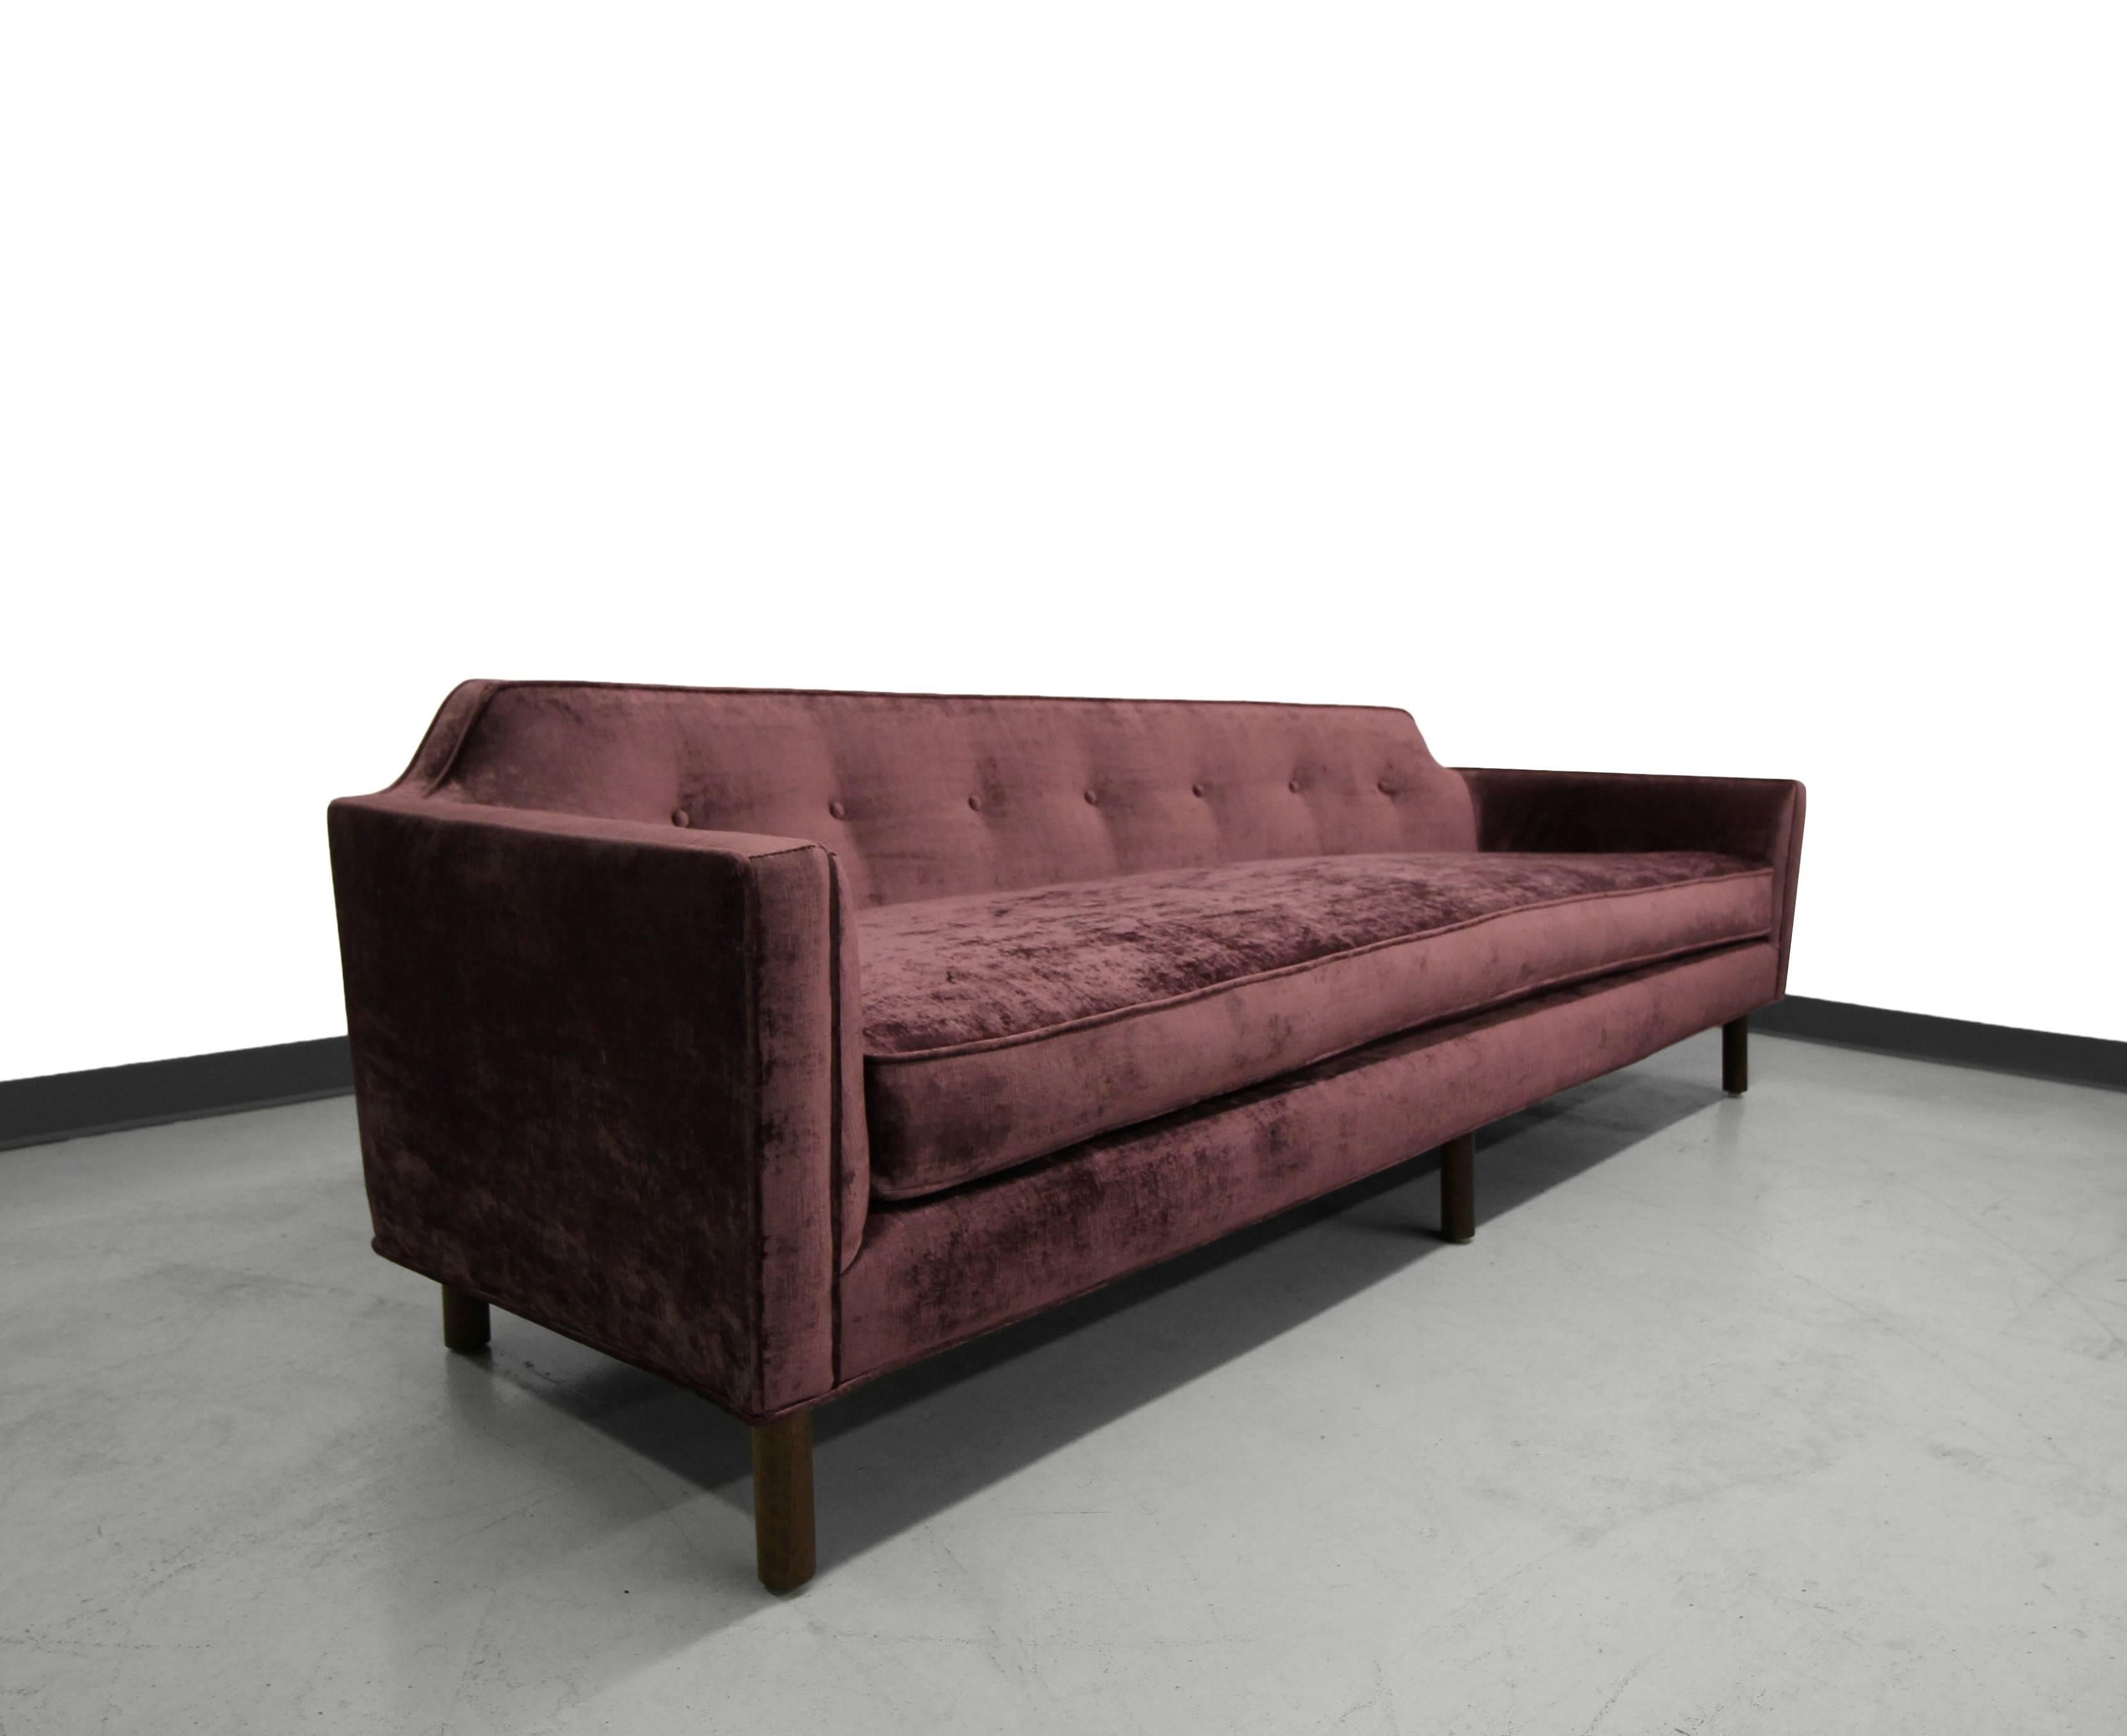 Absolutely gorgeous curvevd back sofa by Edward Wormley for Dunbar. Expertly finished in a plum colored velvet. Sleek, sophisticated with lines to die for.

Sofa has been reupholstered with all new foam and fabric.